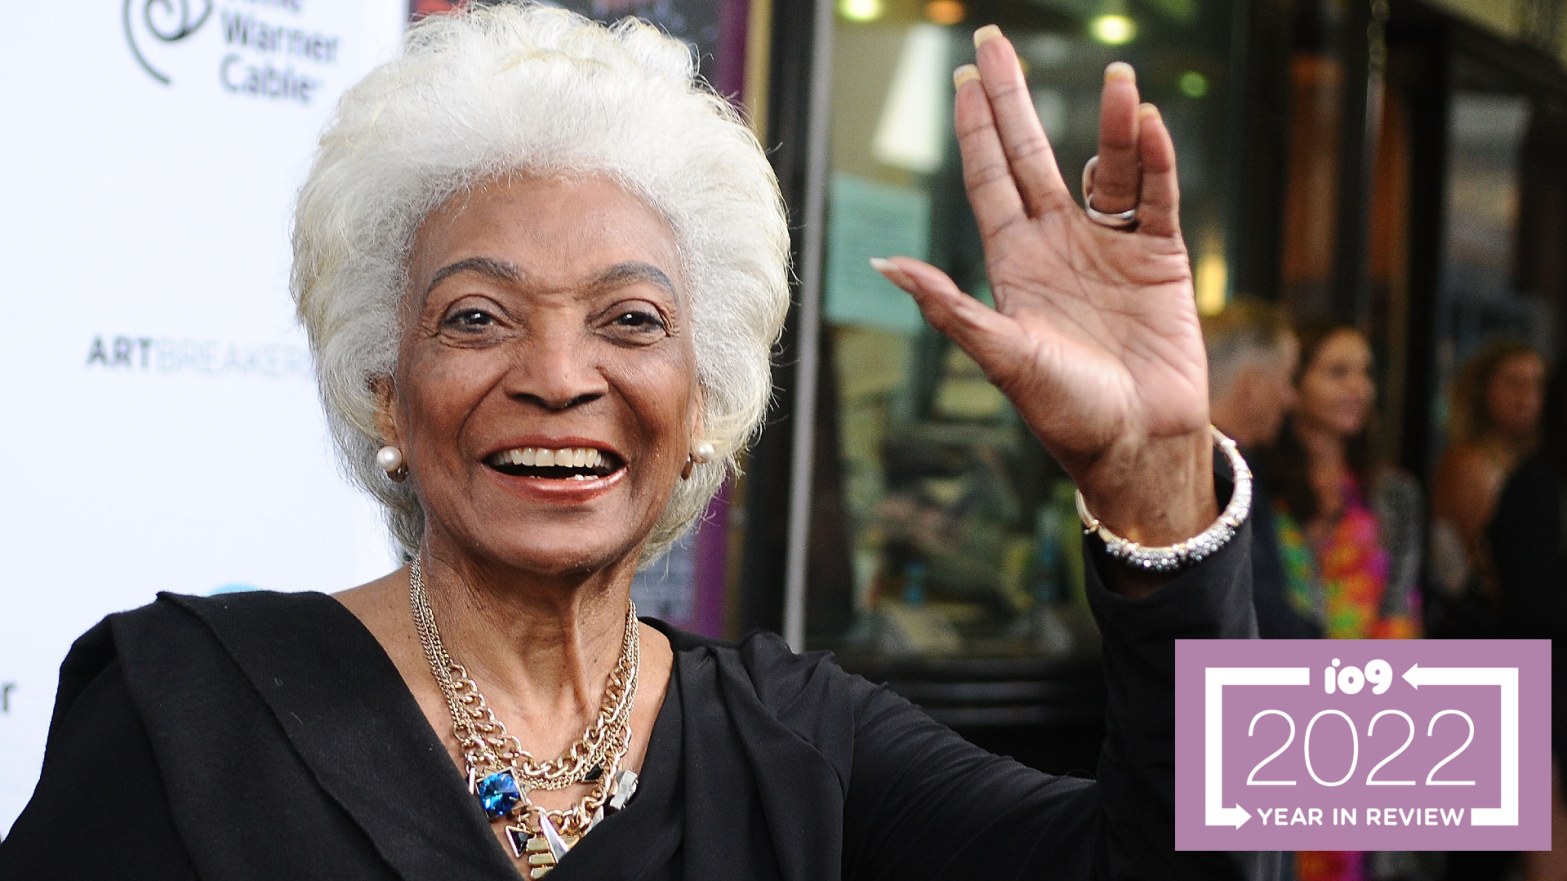 Nichelle Nichols attends the Ovation TV premiere screening of Art Breakers on October 1, 2015 in Los Angeles, California. (Photo: Araya Diaz/Getty Images for Ovation, Getty Images)